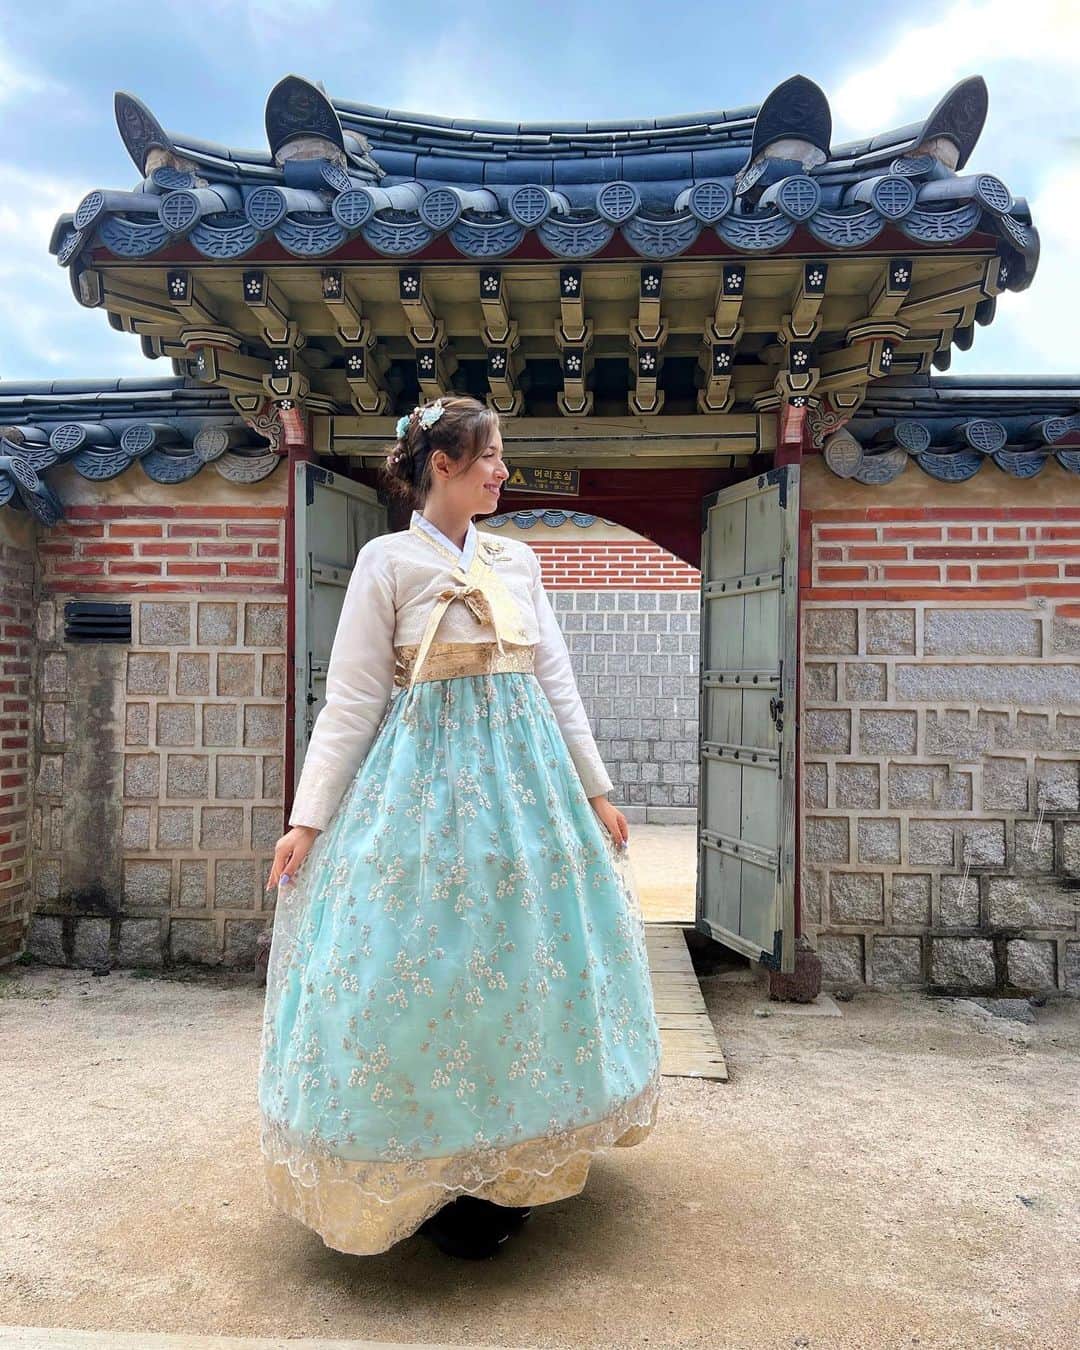 Pokimaneのインスタグラム：「had the honor of wearing a hanbok in korea 🥹  it’s hard to express how happy i am to finally be traveling again. getting to create content around the world, while learning about new cultures & seeing so many of your beautiful faces has been such a fulfilling experience! ☺️ huge thank you to the sweetie pie fans that were so kind & gifted us so many goodies! i surely gained 5 pounds from all the yummy food but it was hella worth it LOL   + huge thank you to the homies that joined @jakenbakelive @ariasaki @milktpapi @igumdrop @immwater ❤️  where should i go next? 😁✈️」